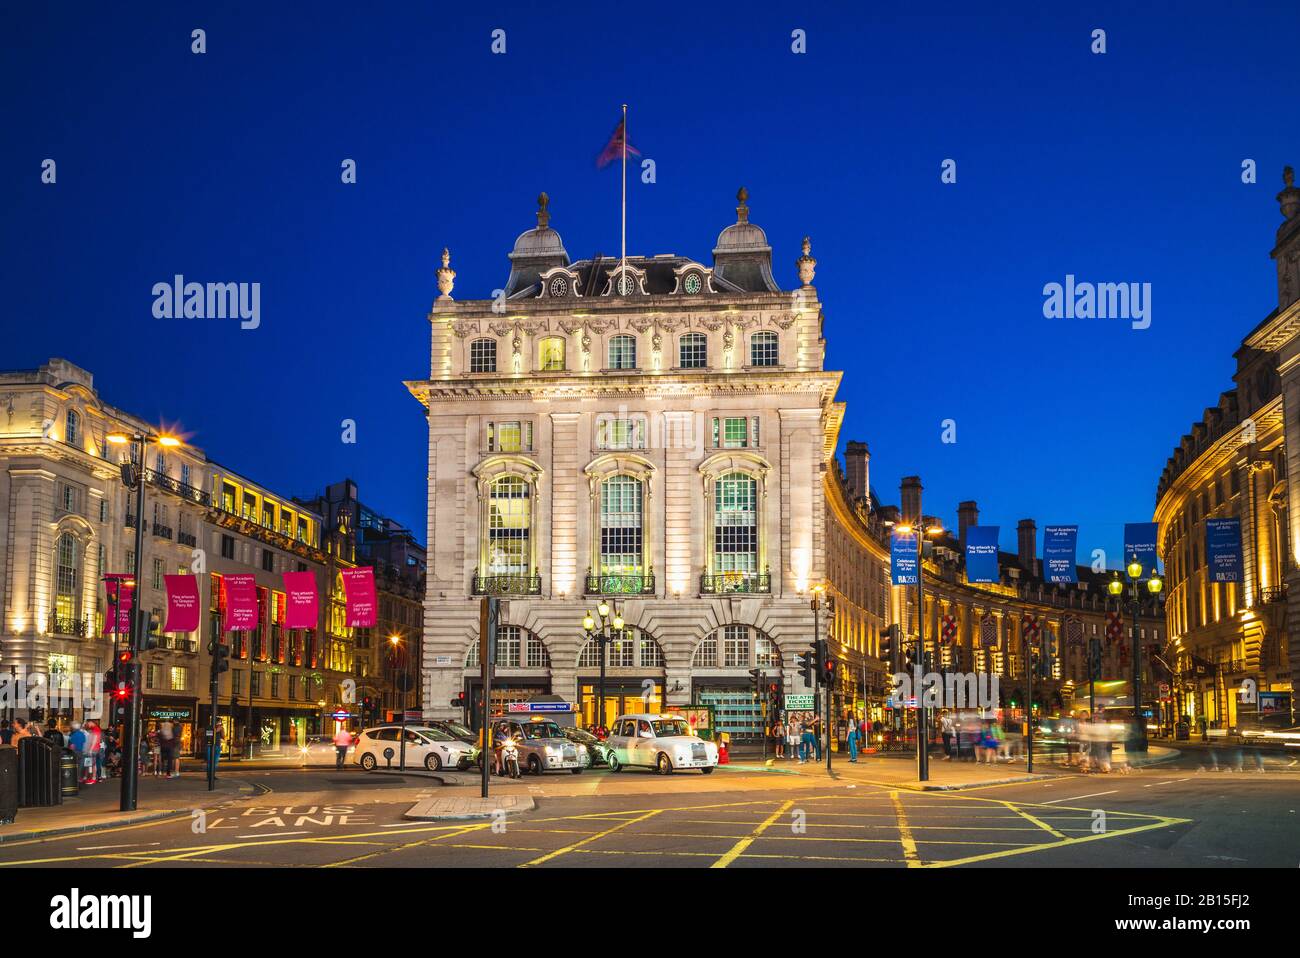 London, UK - July 3, 2018: night view of piccadilly circus, a road junction and public space of London's West End in the City of Westminster. Stock Photo